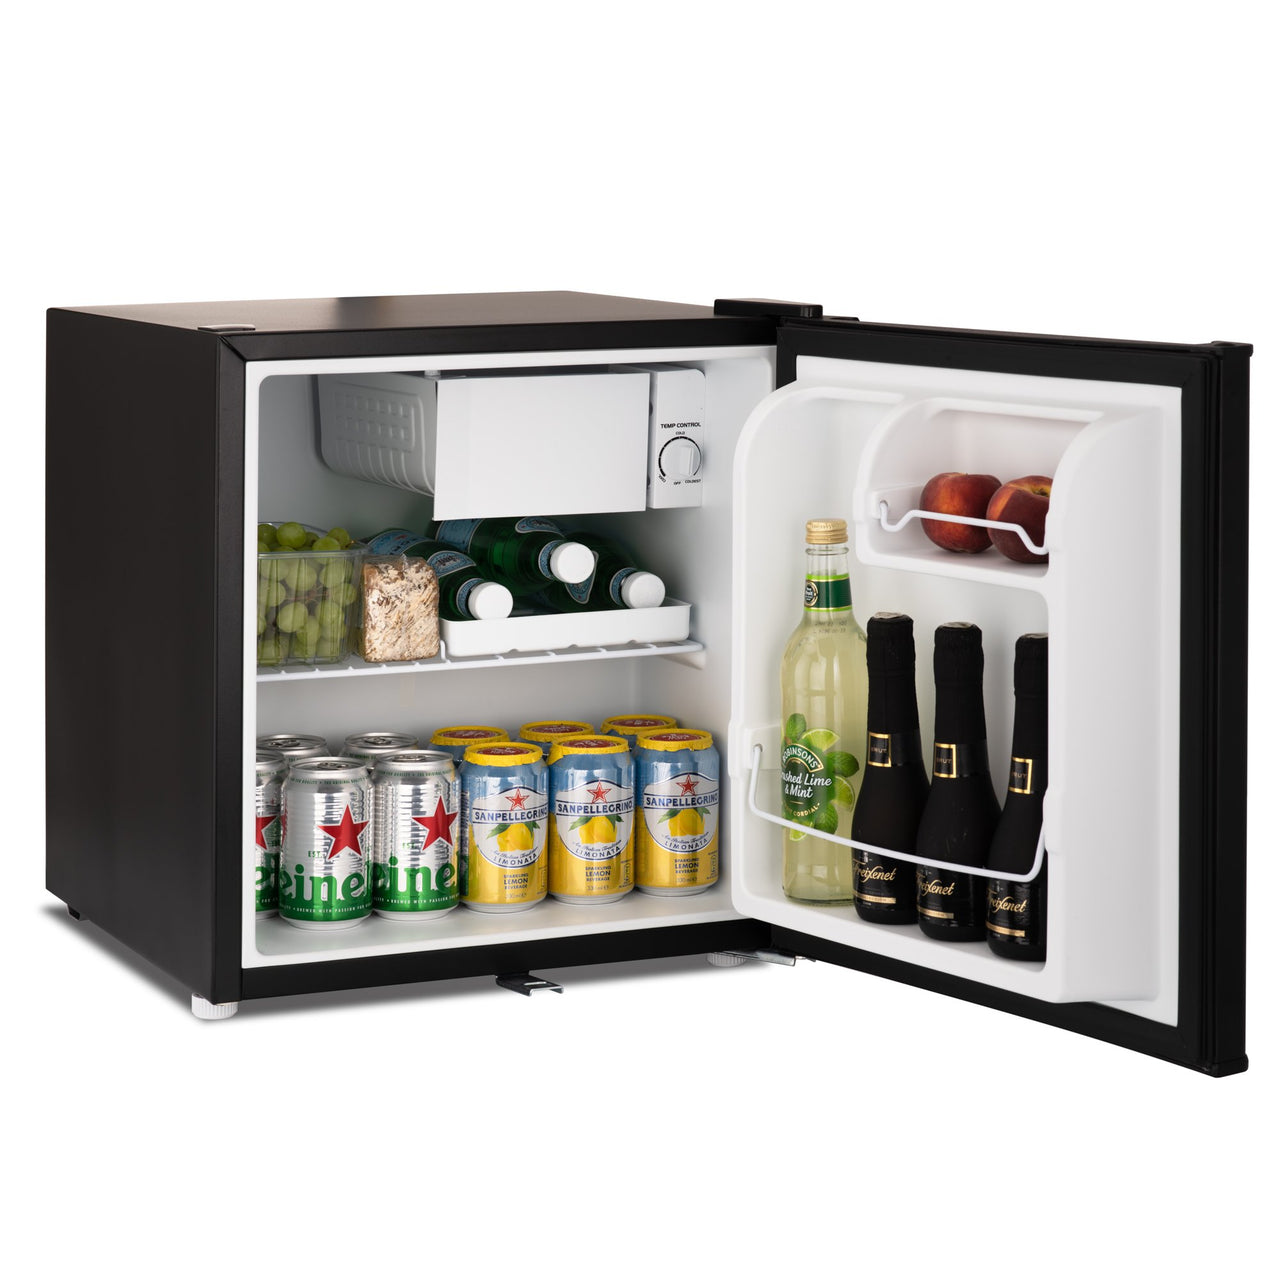 Subcold Eco 50 litre table top fridge with snacks and drinks inside